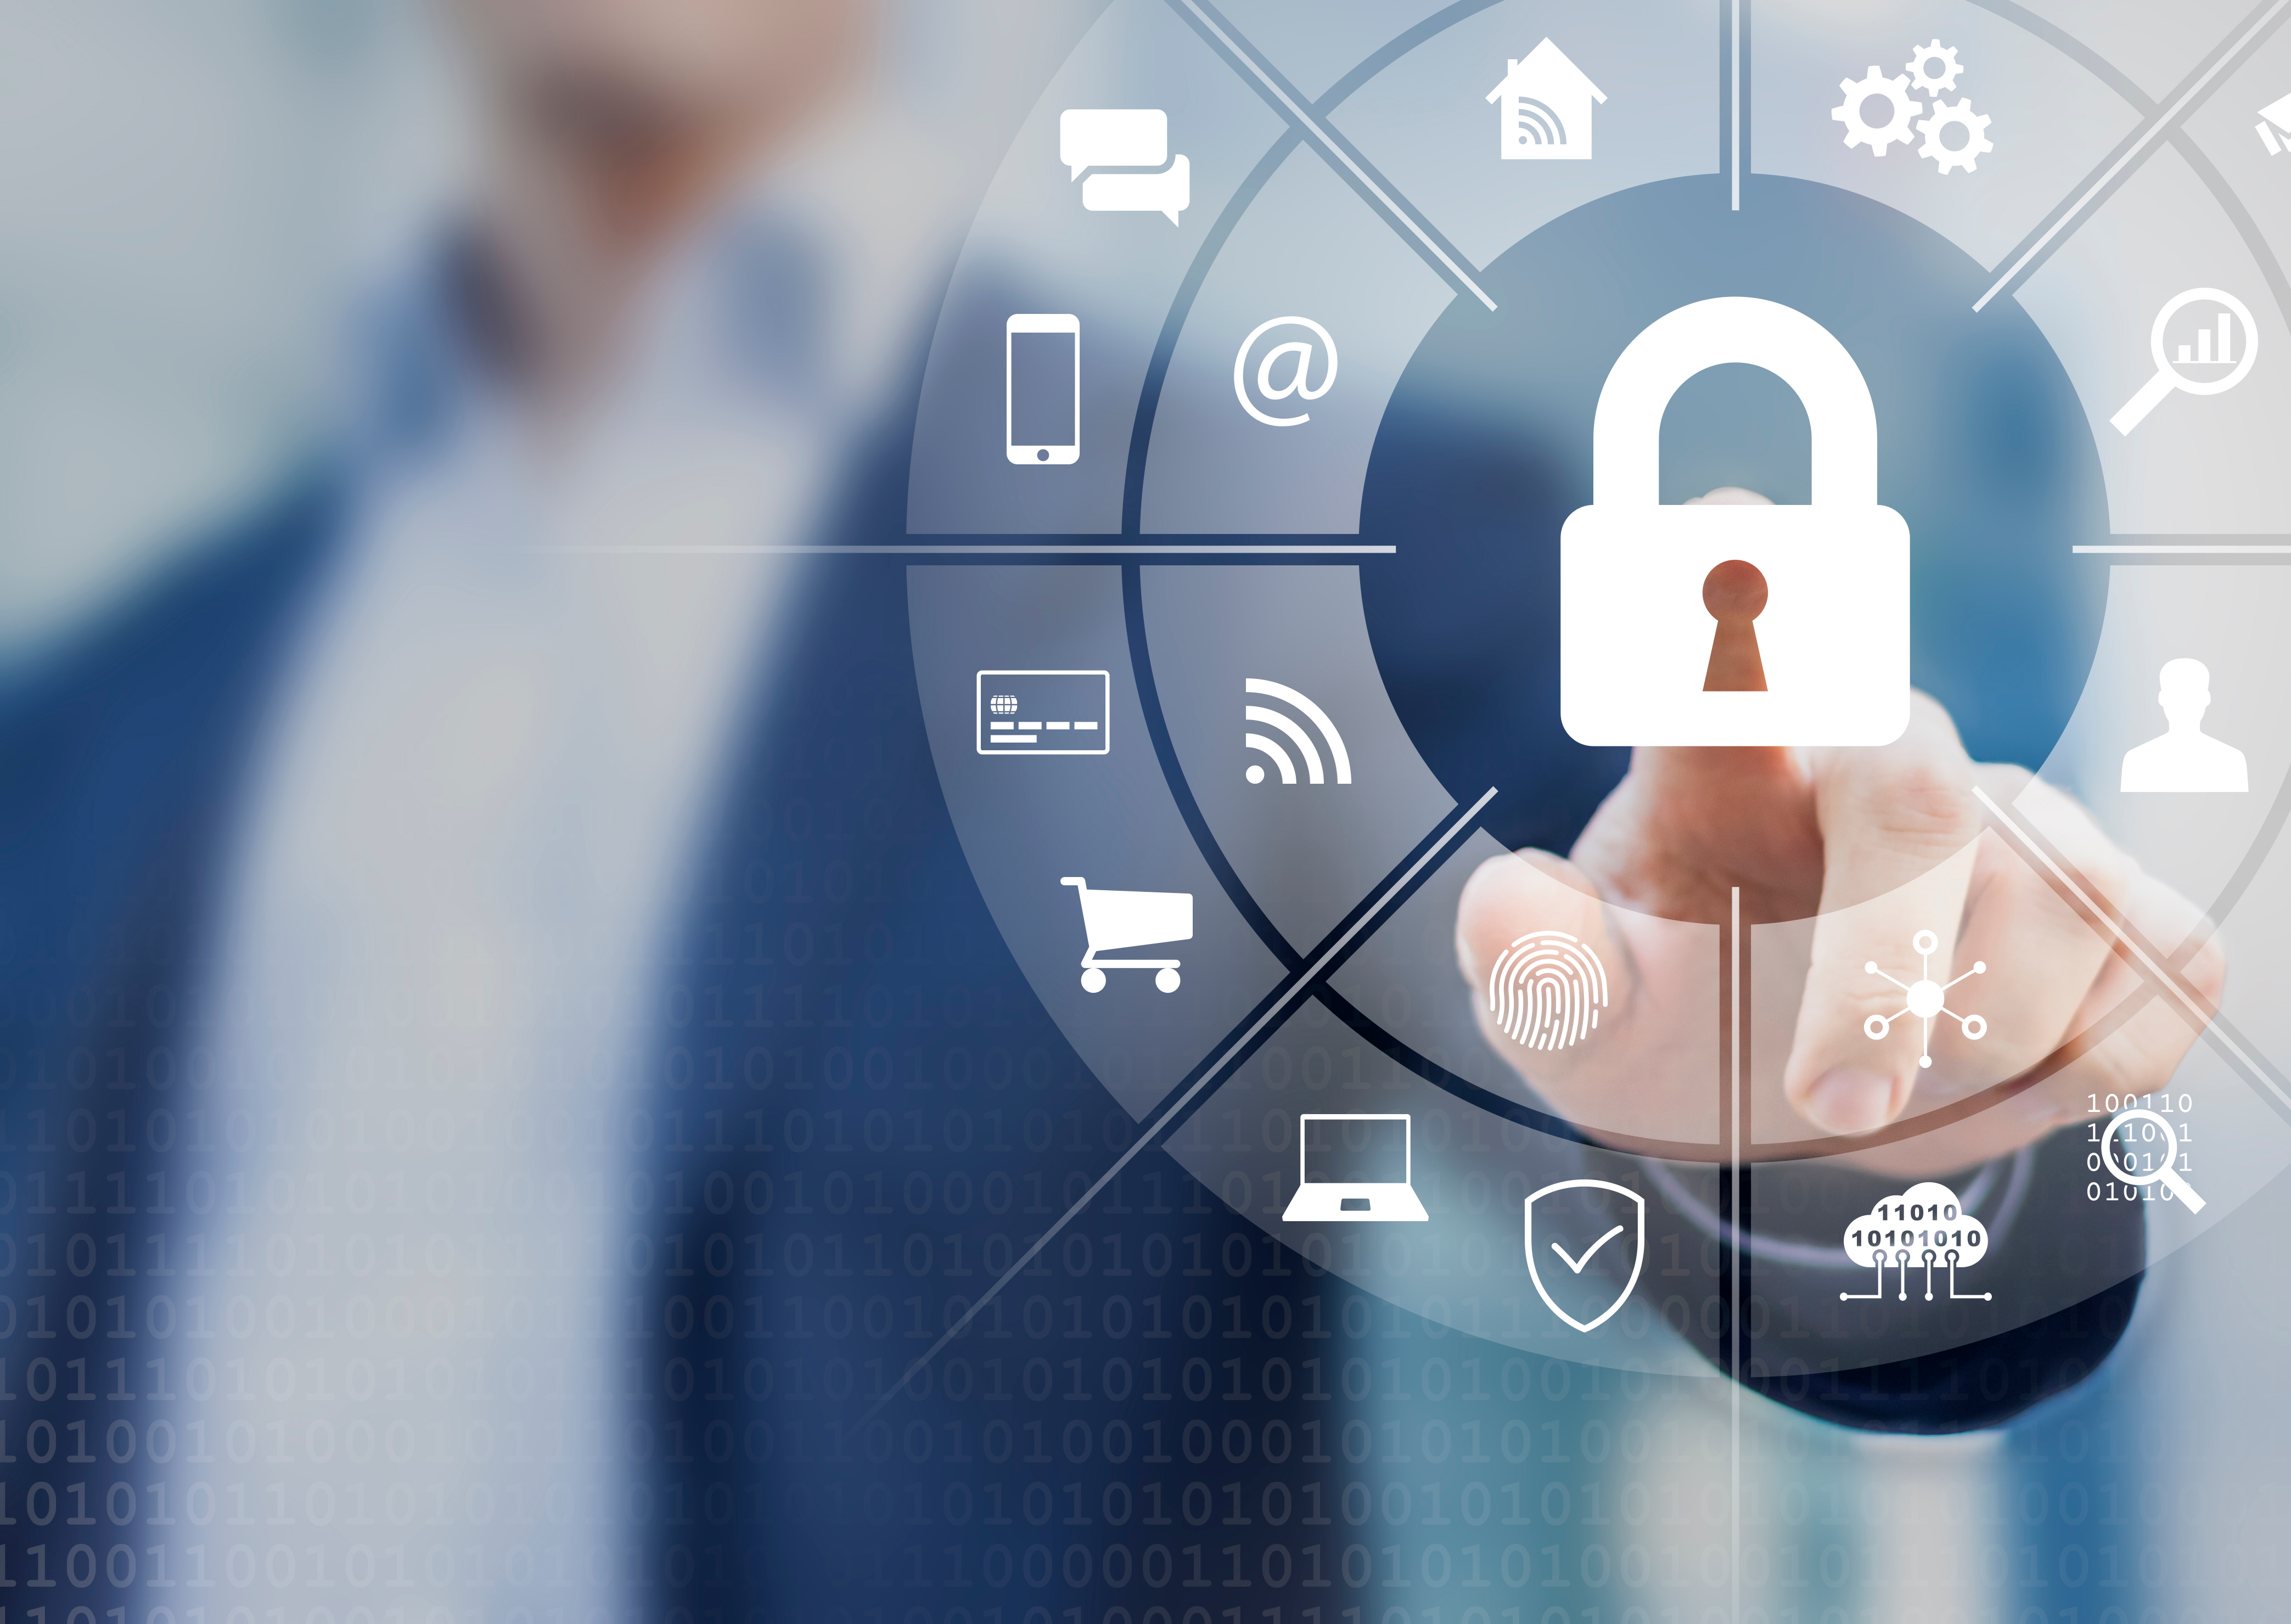 Implementing Security Measures in IoT Devices